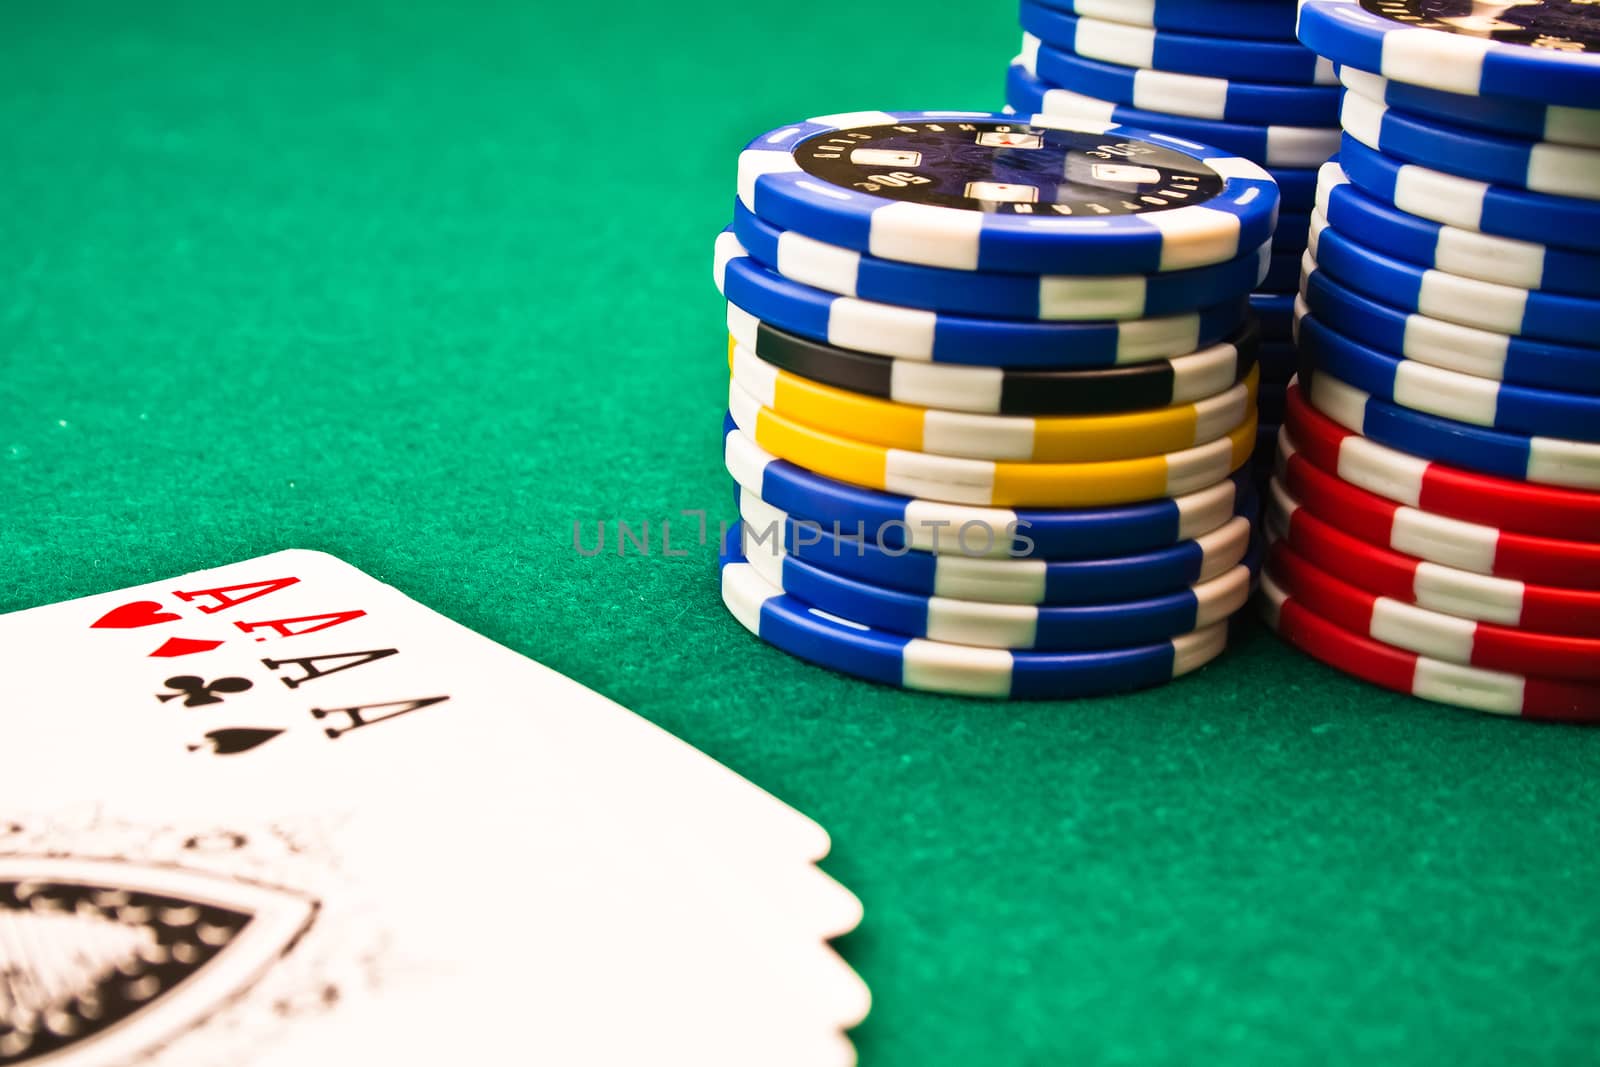 Detail of chips poker and poker aces